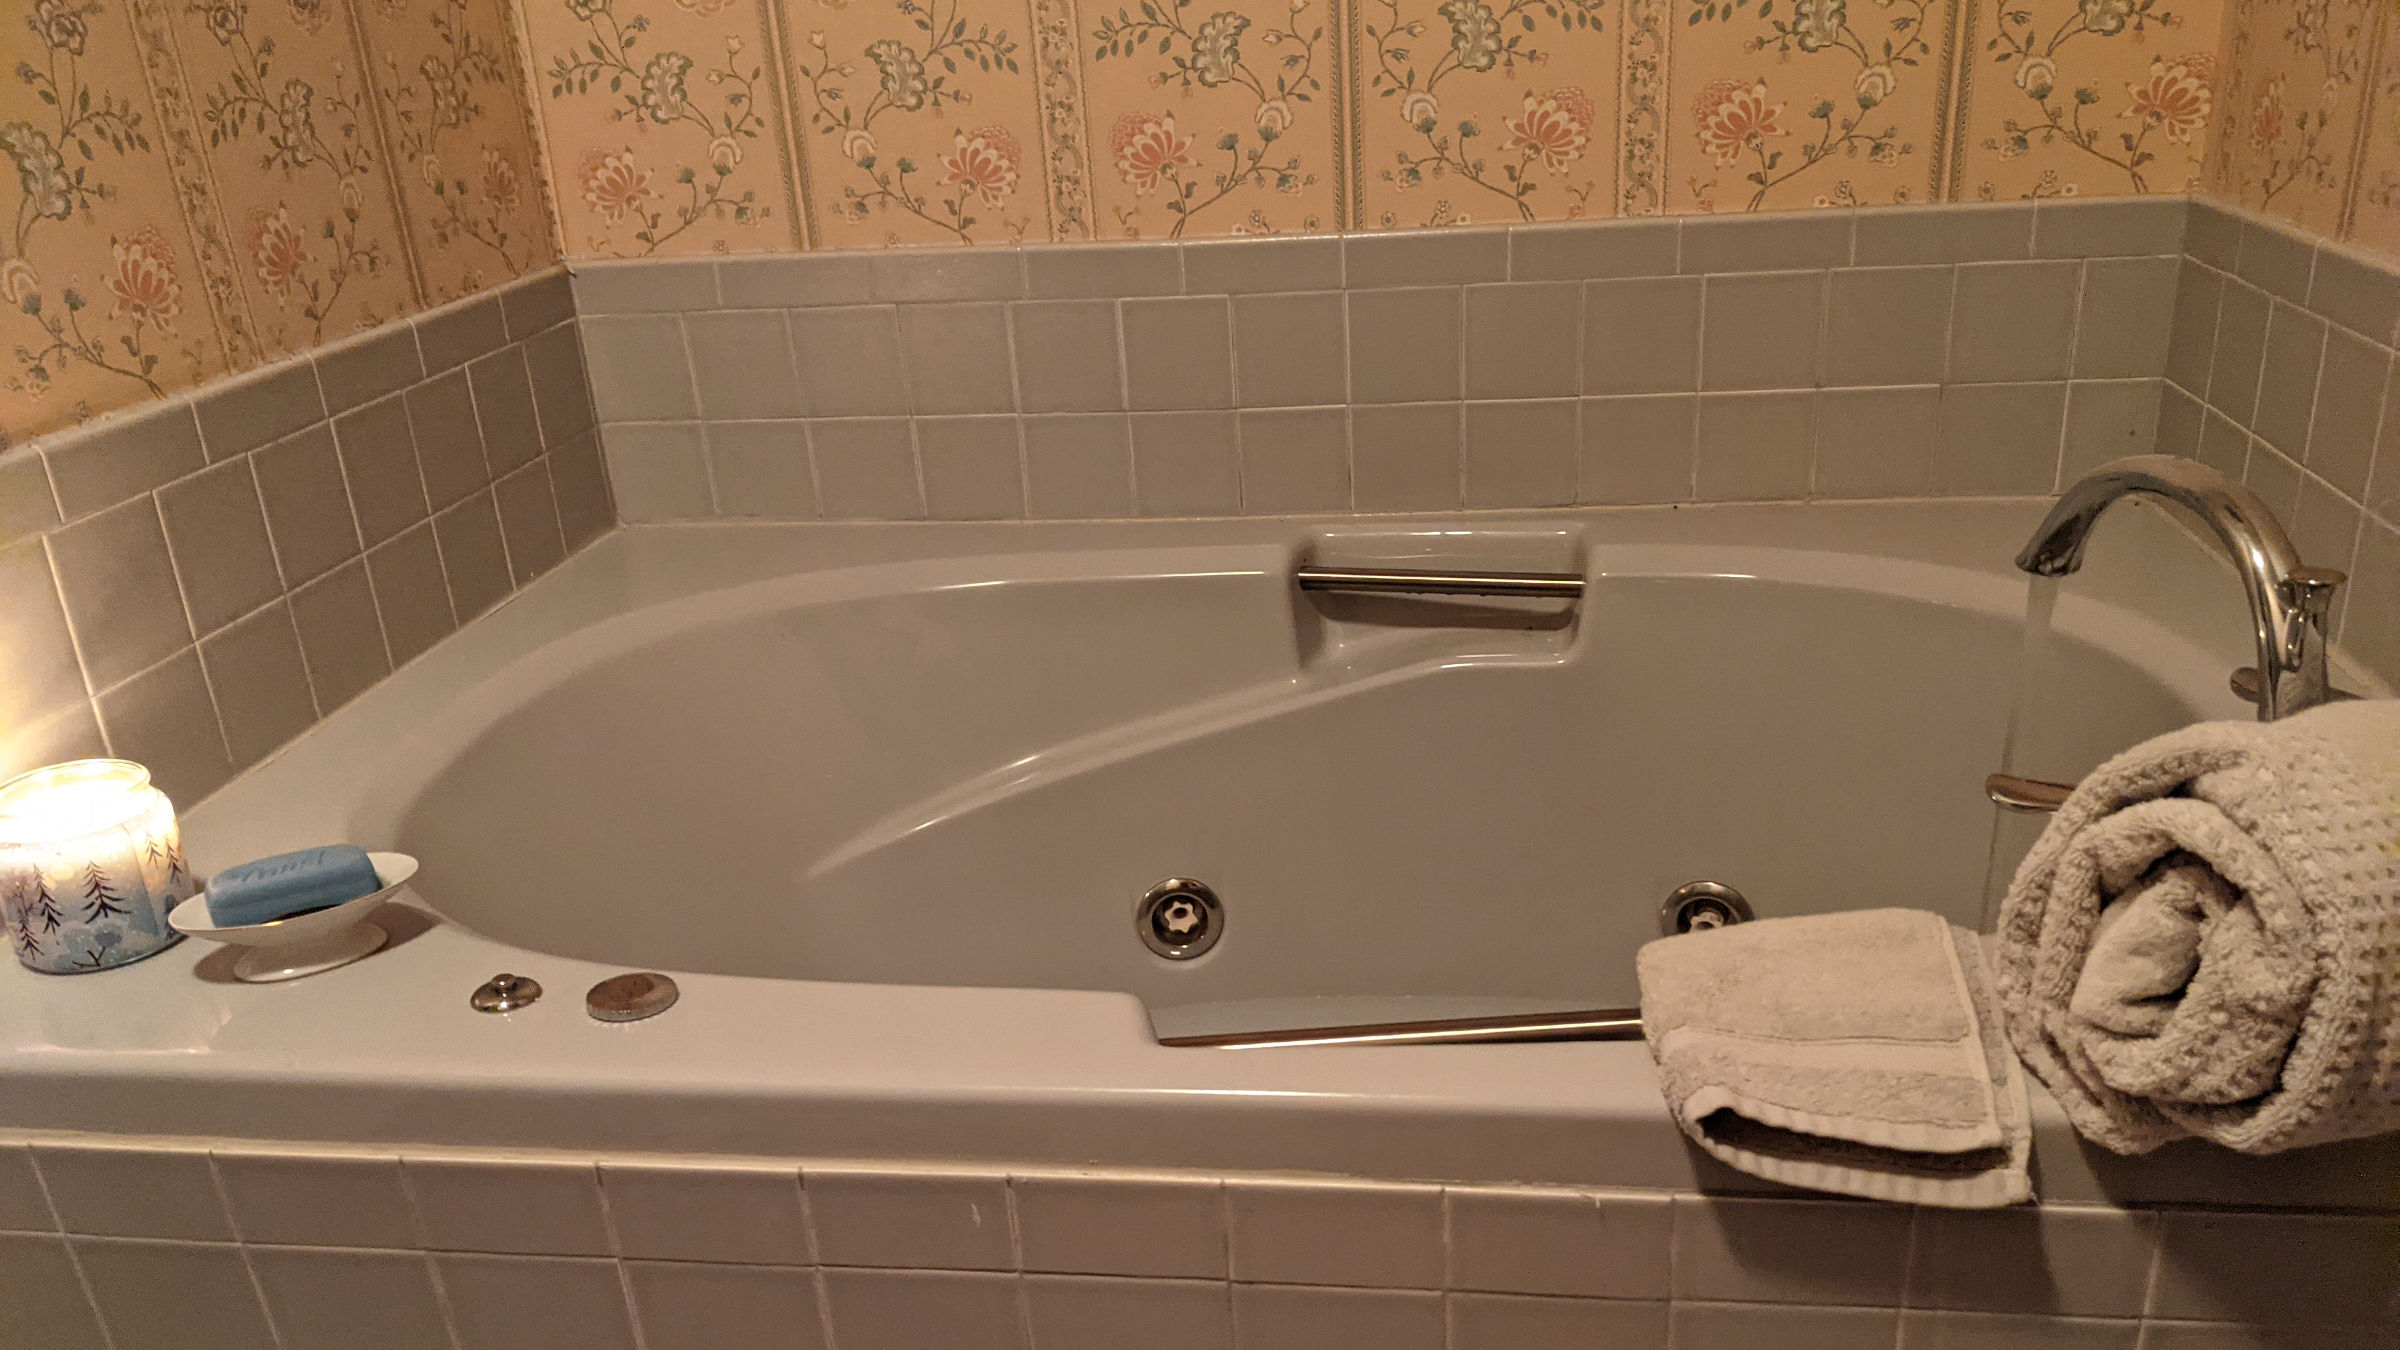 Whirlpool-style bathtub with blue-gray tile and step-up. 1980s-era wallpaper above.